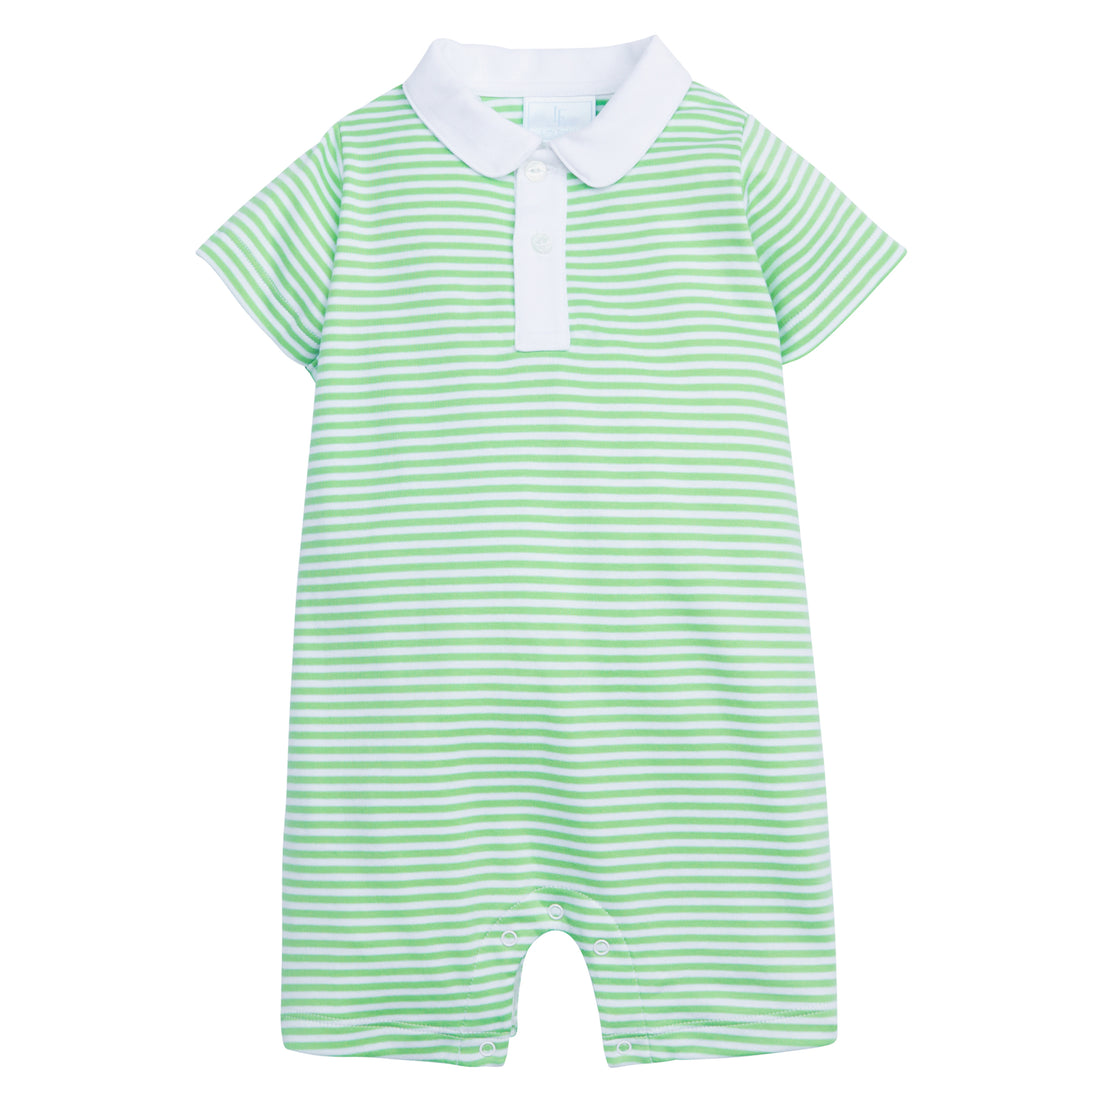 Little English traditional clothing for boys, green striped knit romper with peter pan collar for spring